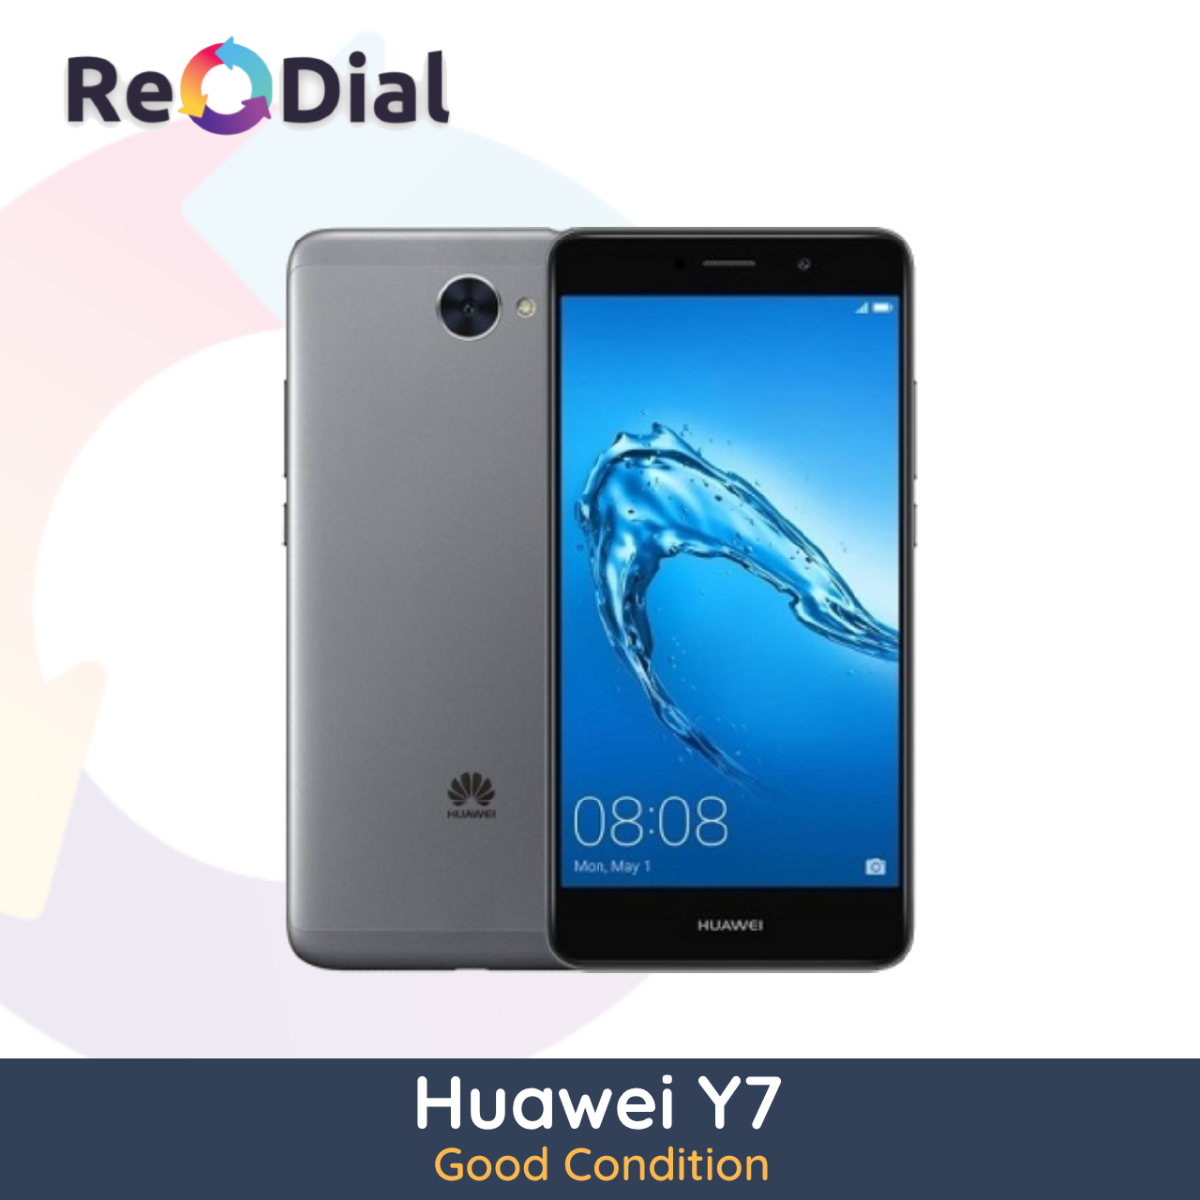 Huawei Y7 (2017) - Good Condition